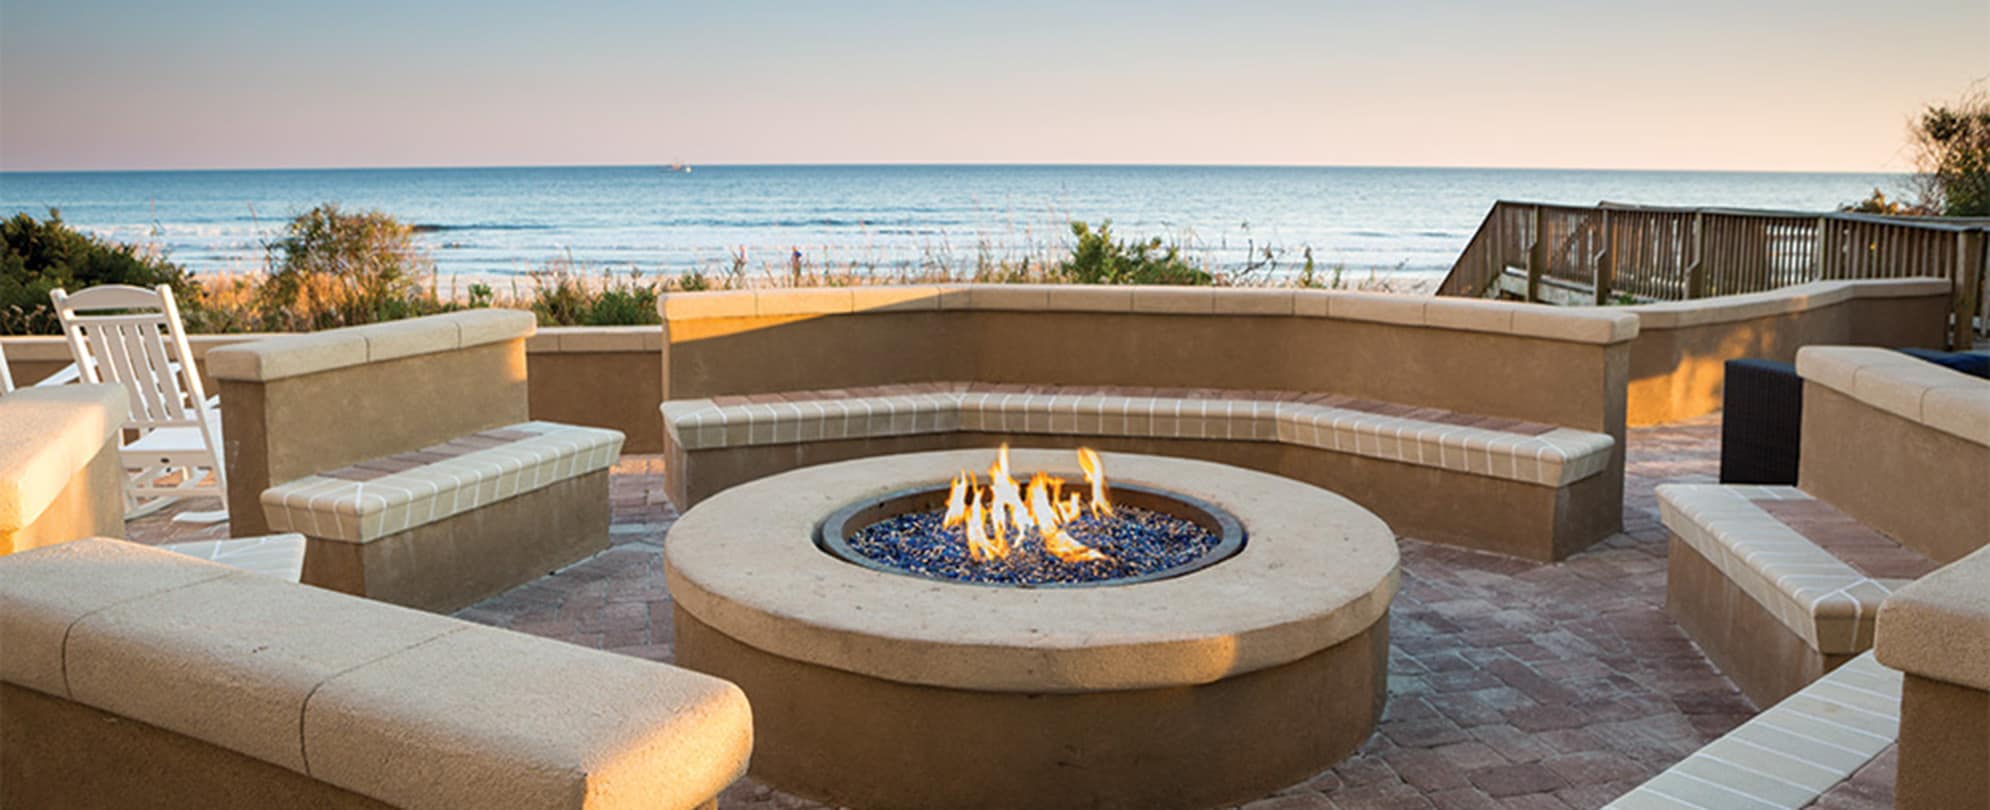 Wide view of an outdoor firepit by the beach.